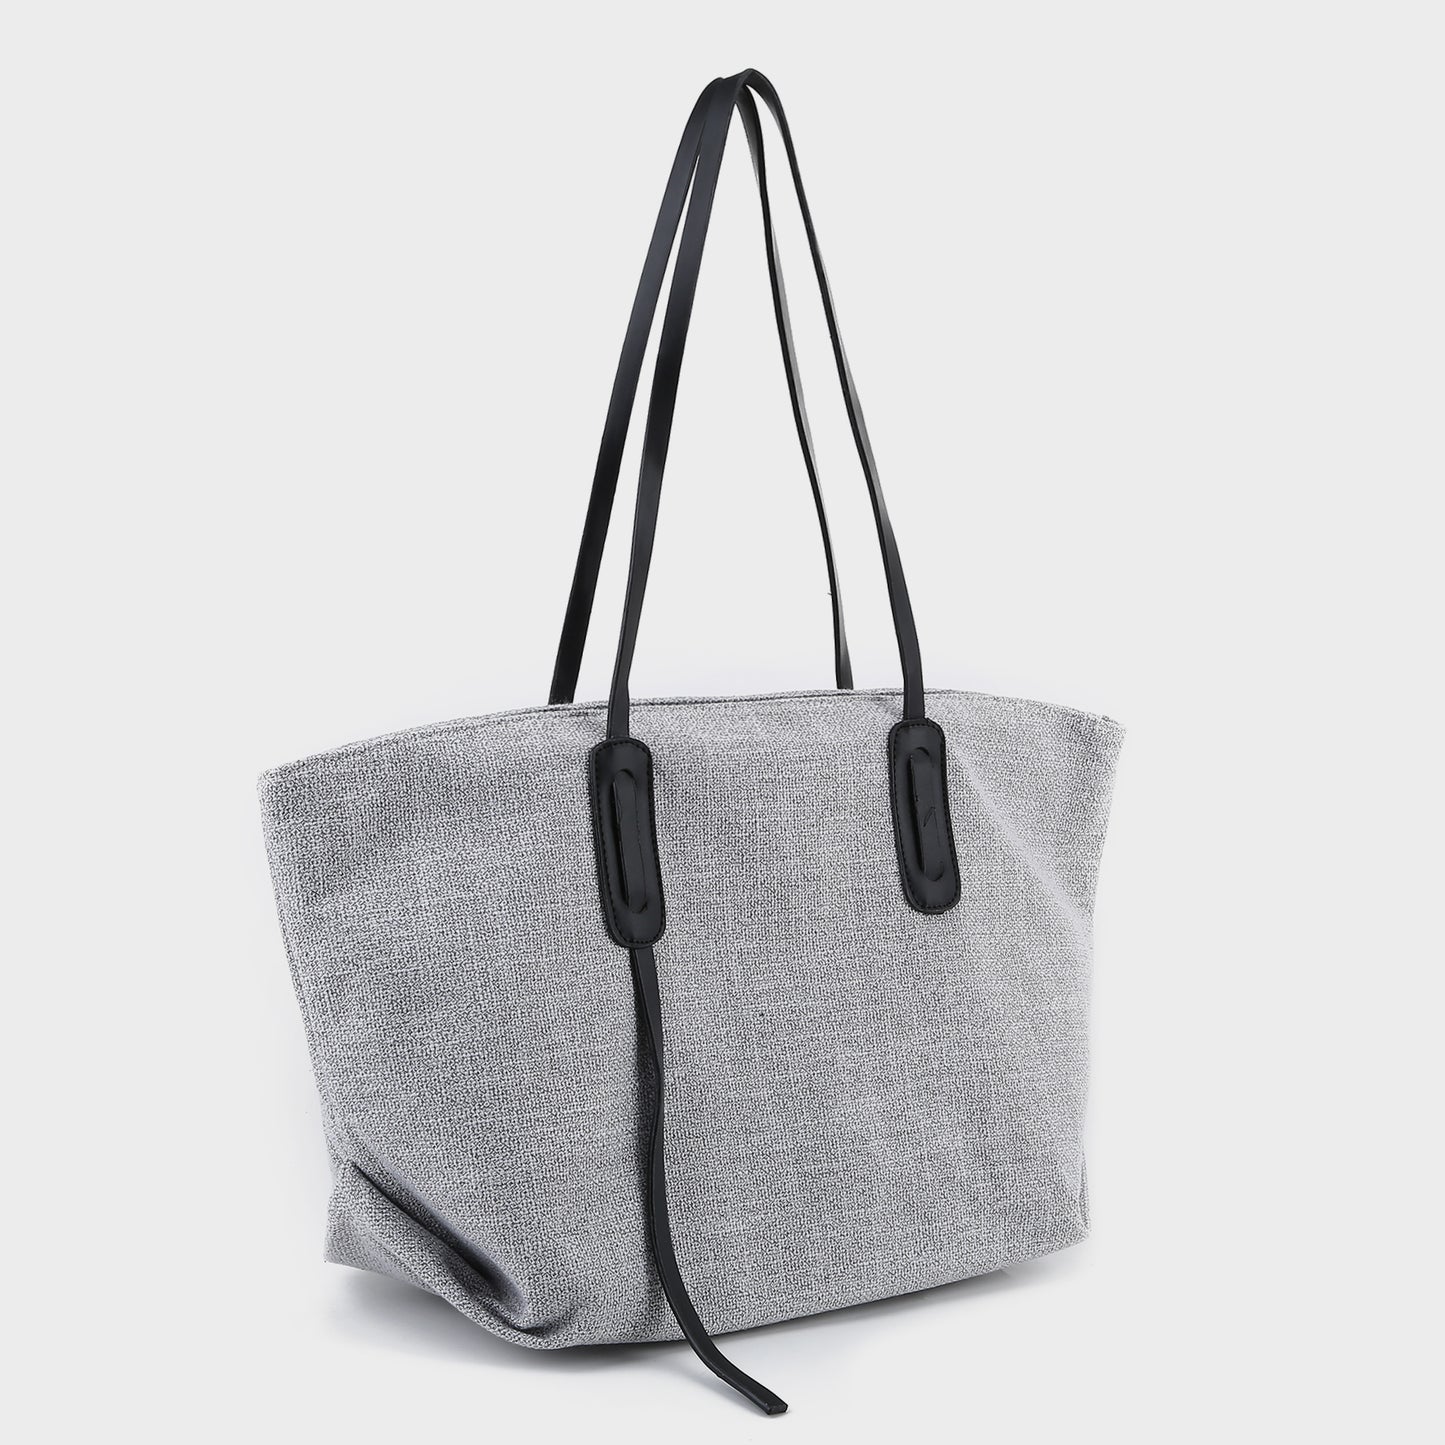 PU leather handle classic canvas tote